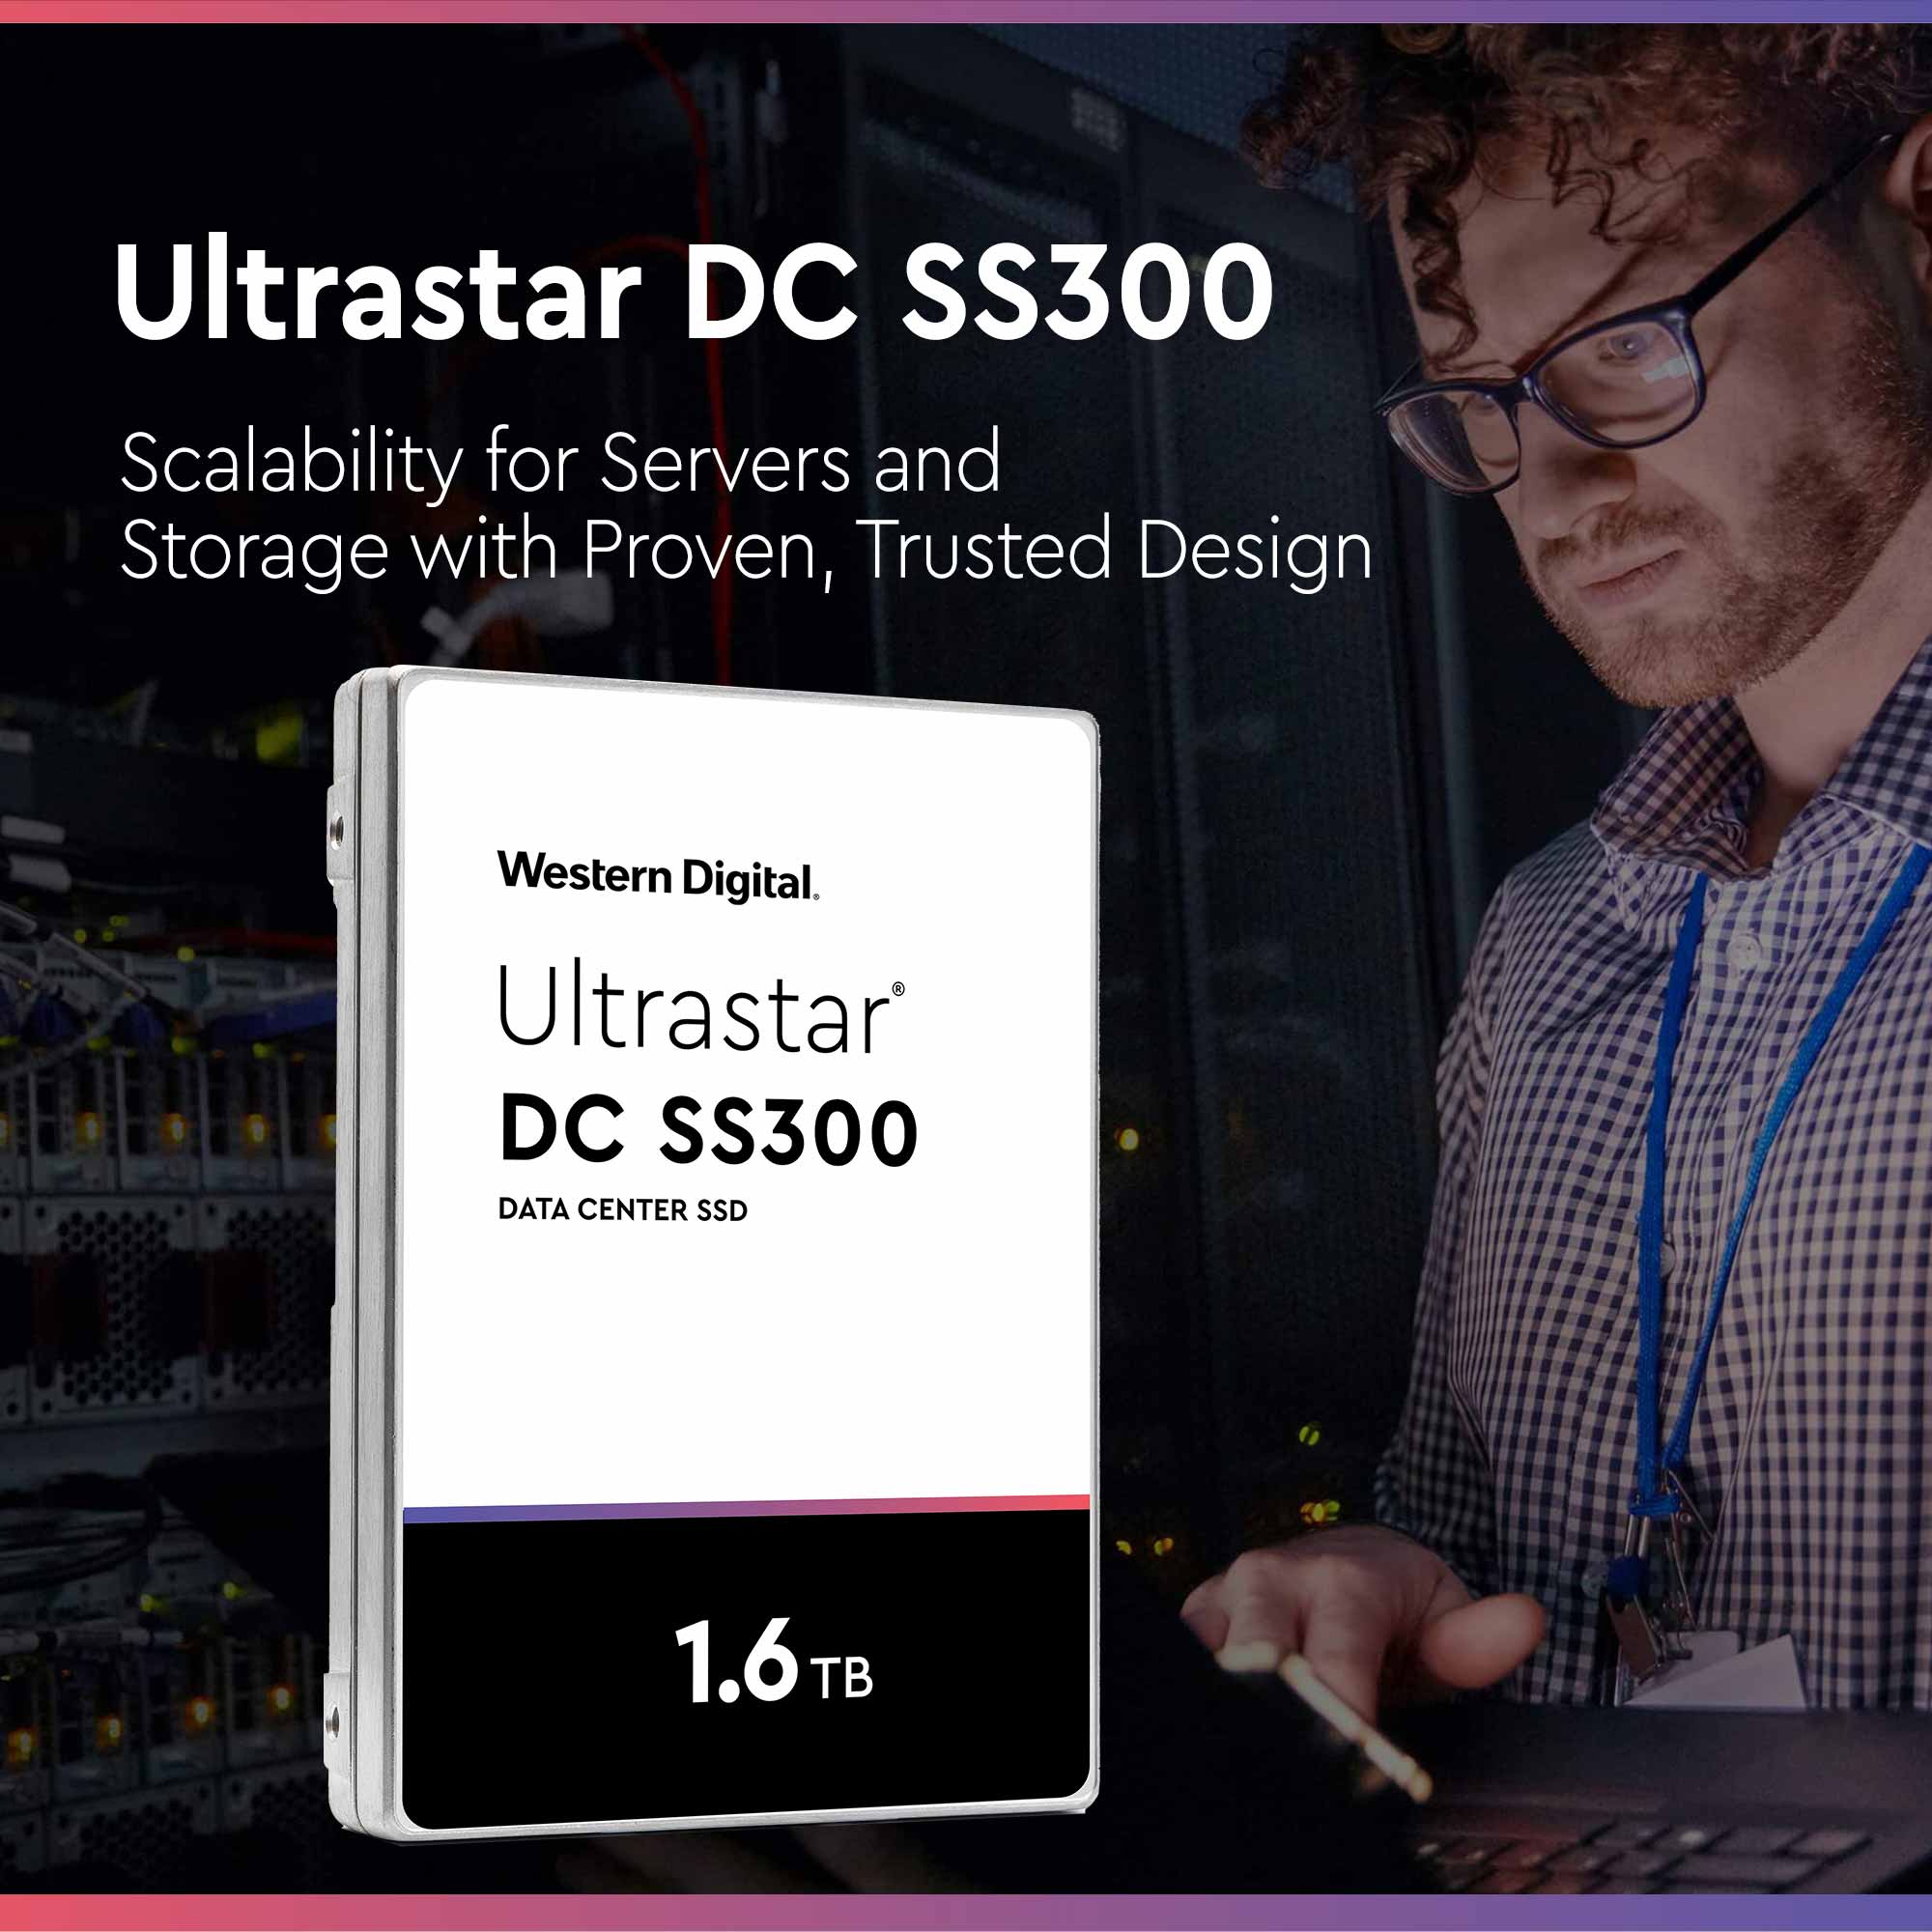 Western Digital Ultrastar DC SS300 HUSMM3216ASS204 1.6TB SAS 12Gb/s 512e 2.5in Solid State Drive - Scalability for servers and storage with proven, trusted design.